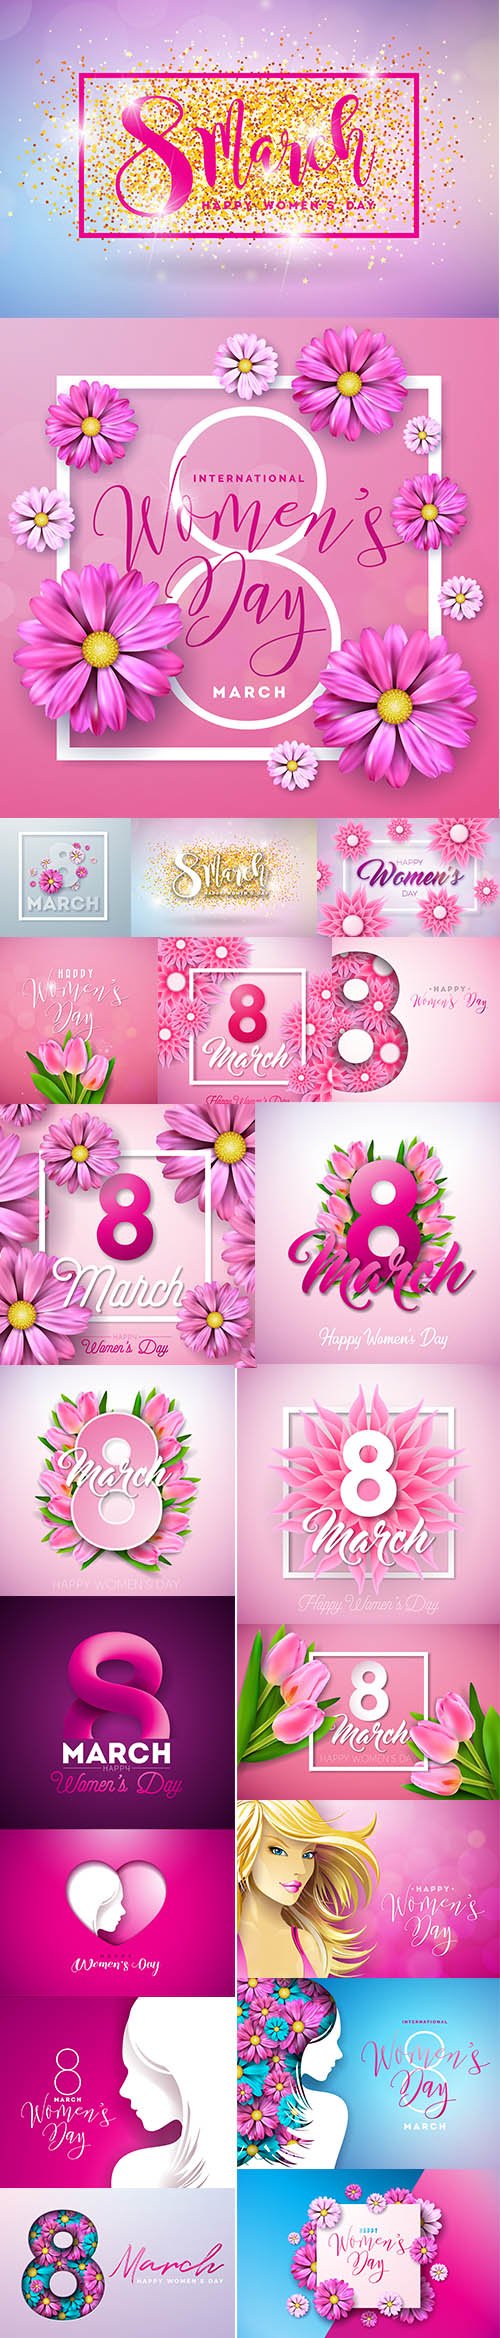 Happy Womens Day Floral Greeting Card Premium Illustrations Set